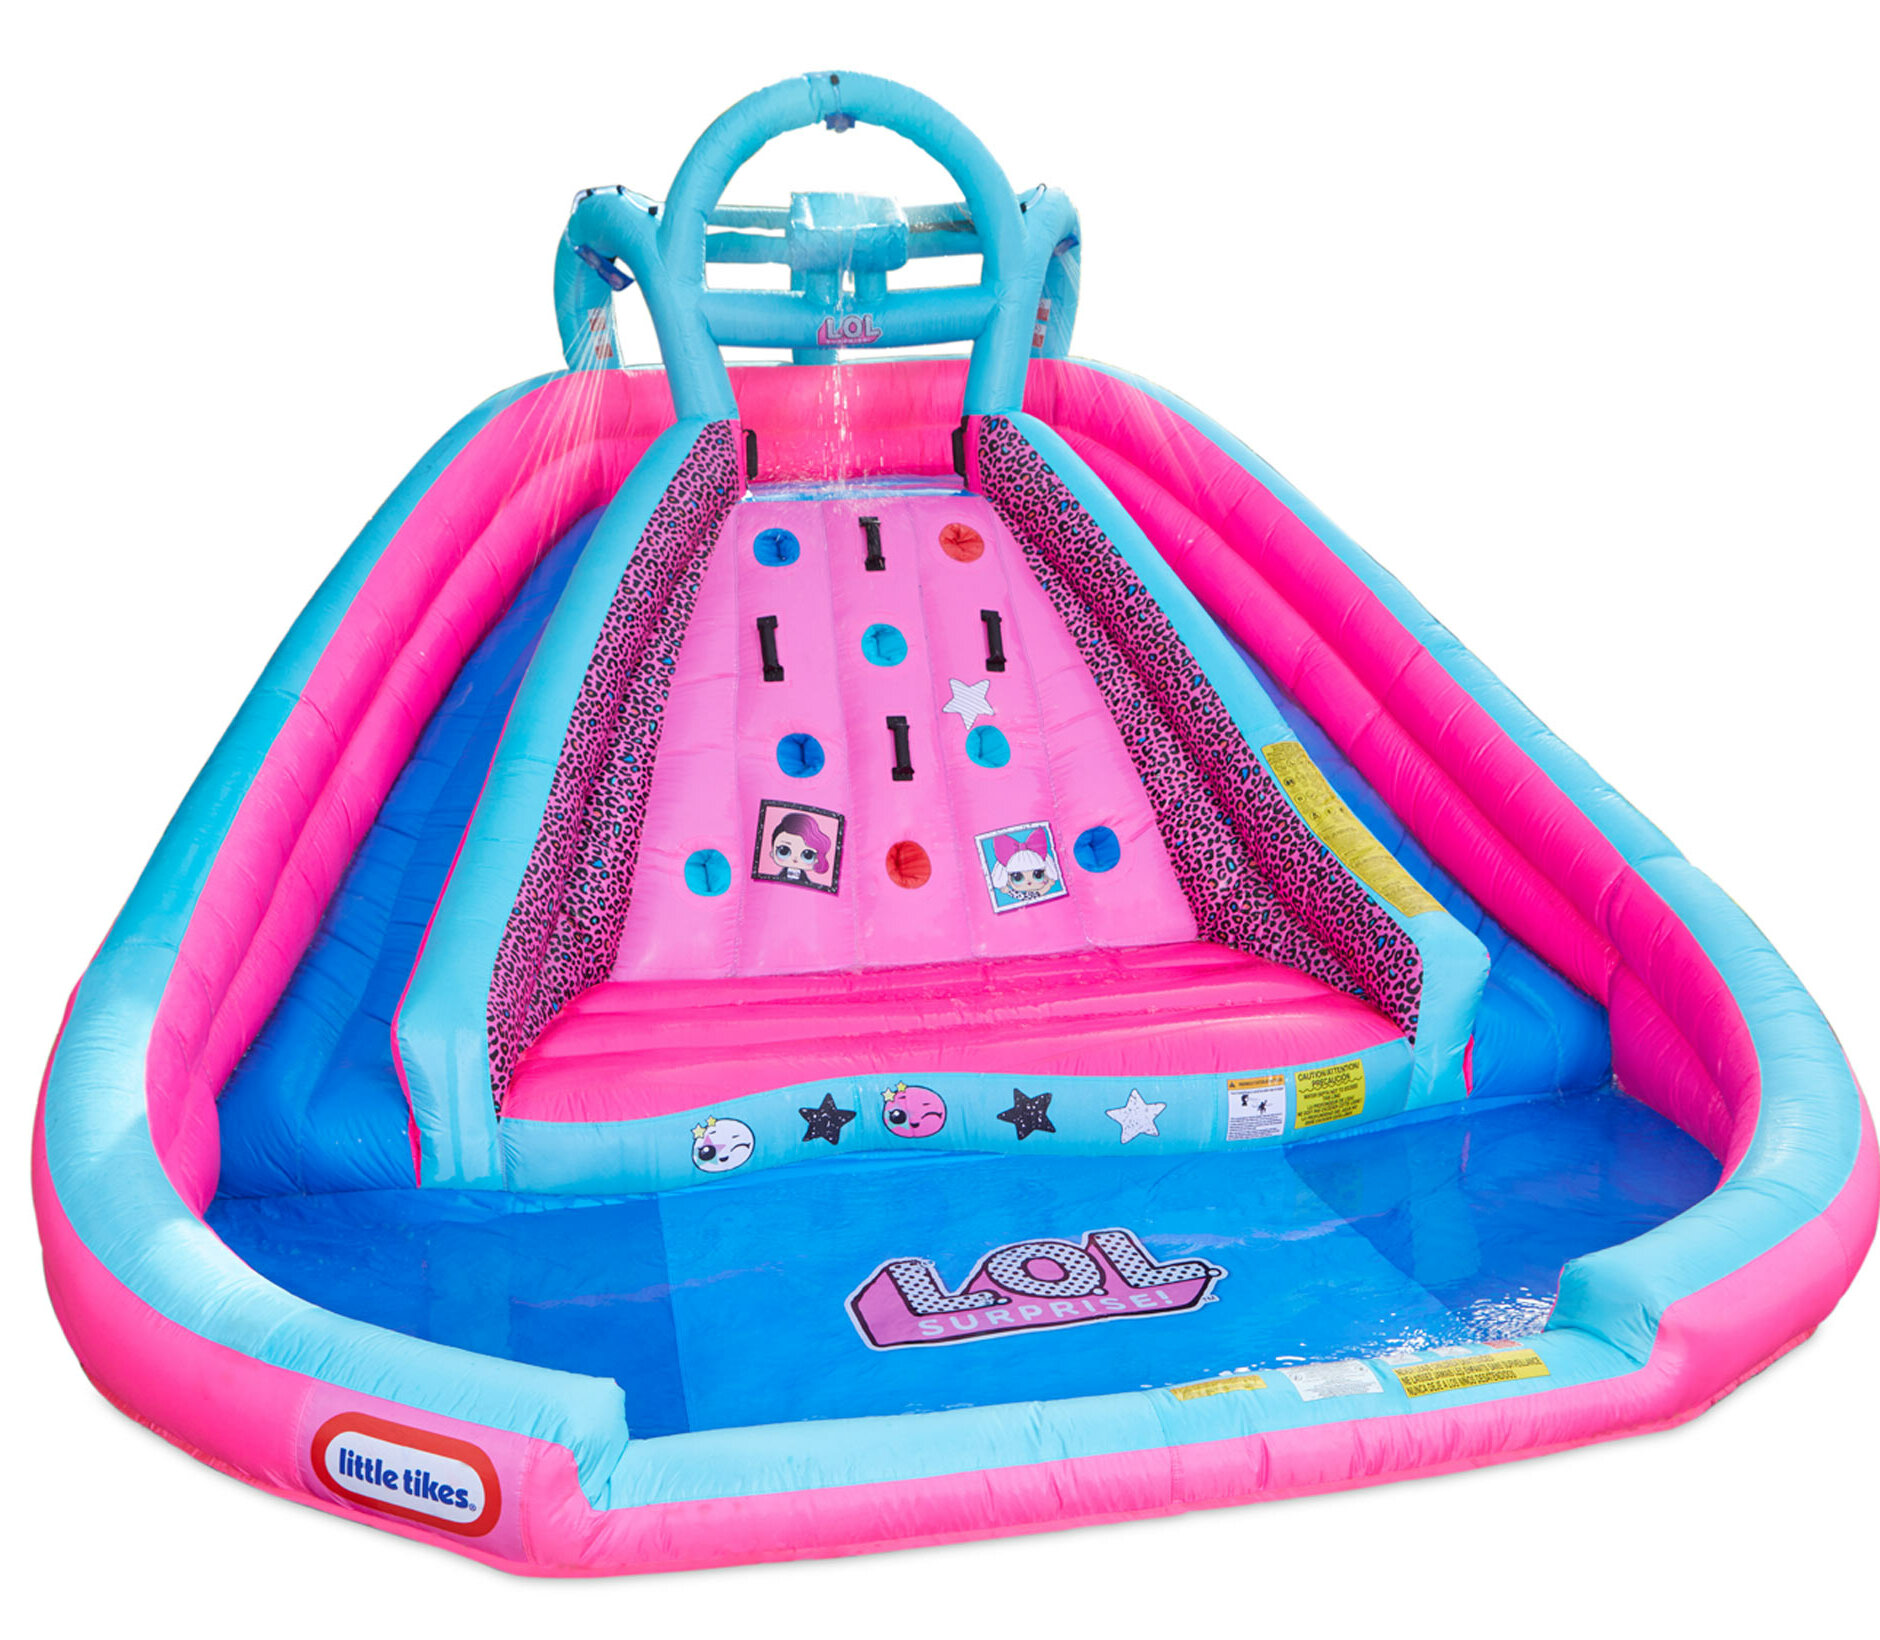 rocky mountain river race inflatable slide bouncer